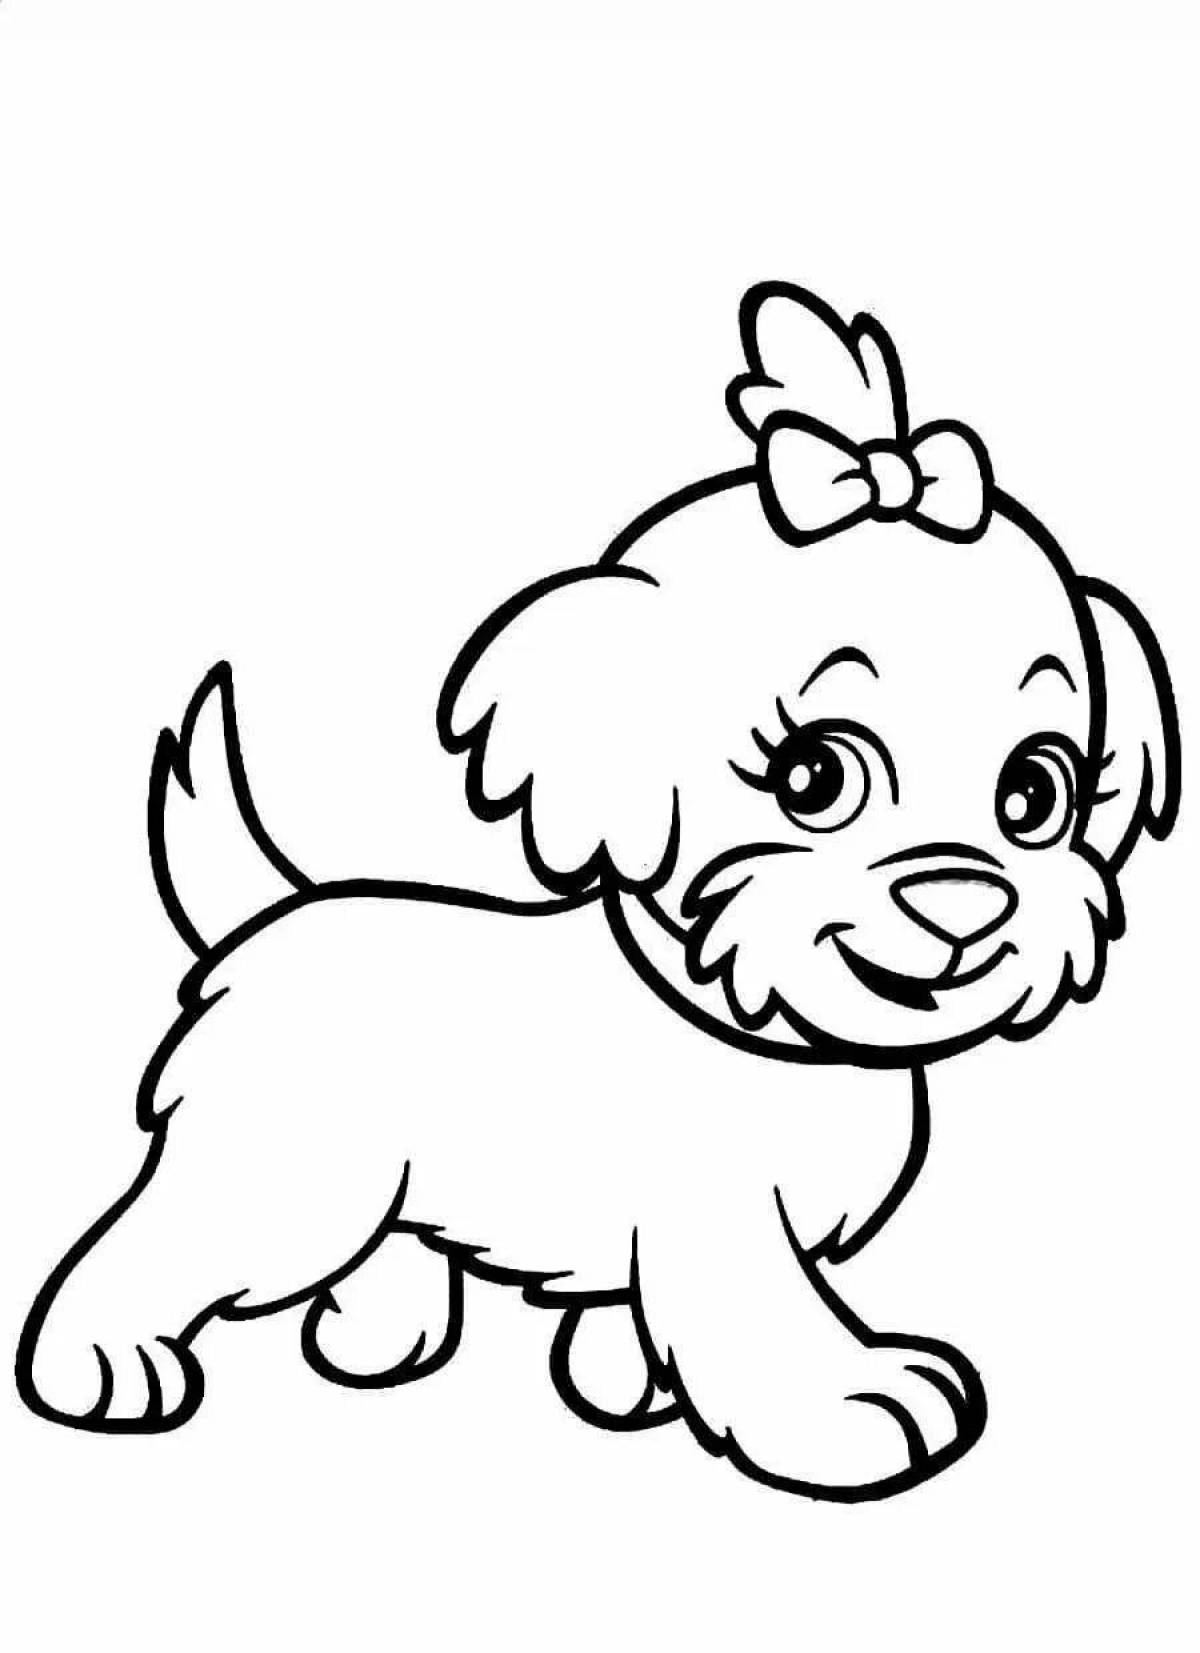 Coloring book shiny dog ​​for kids